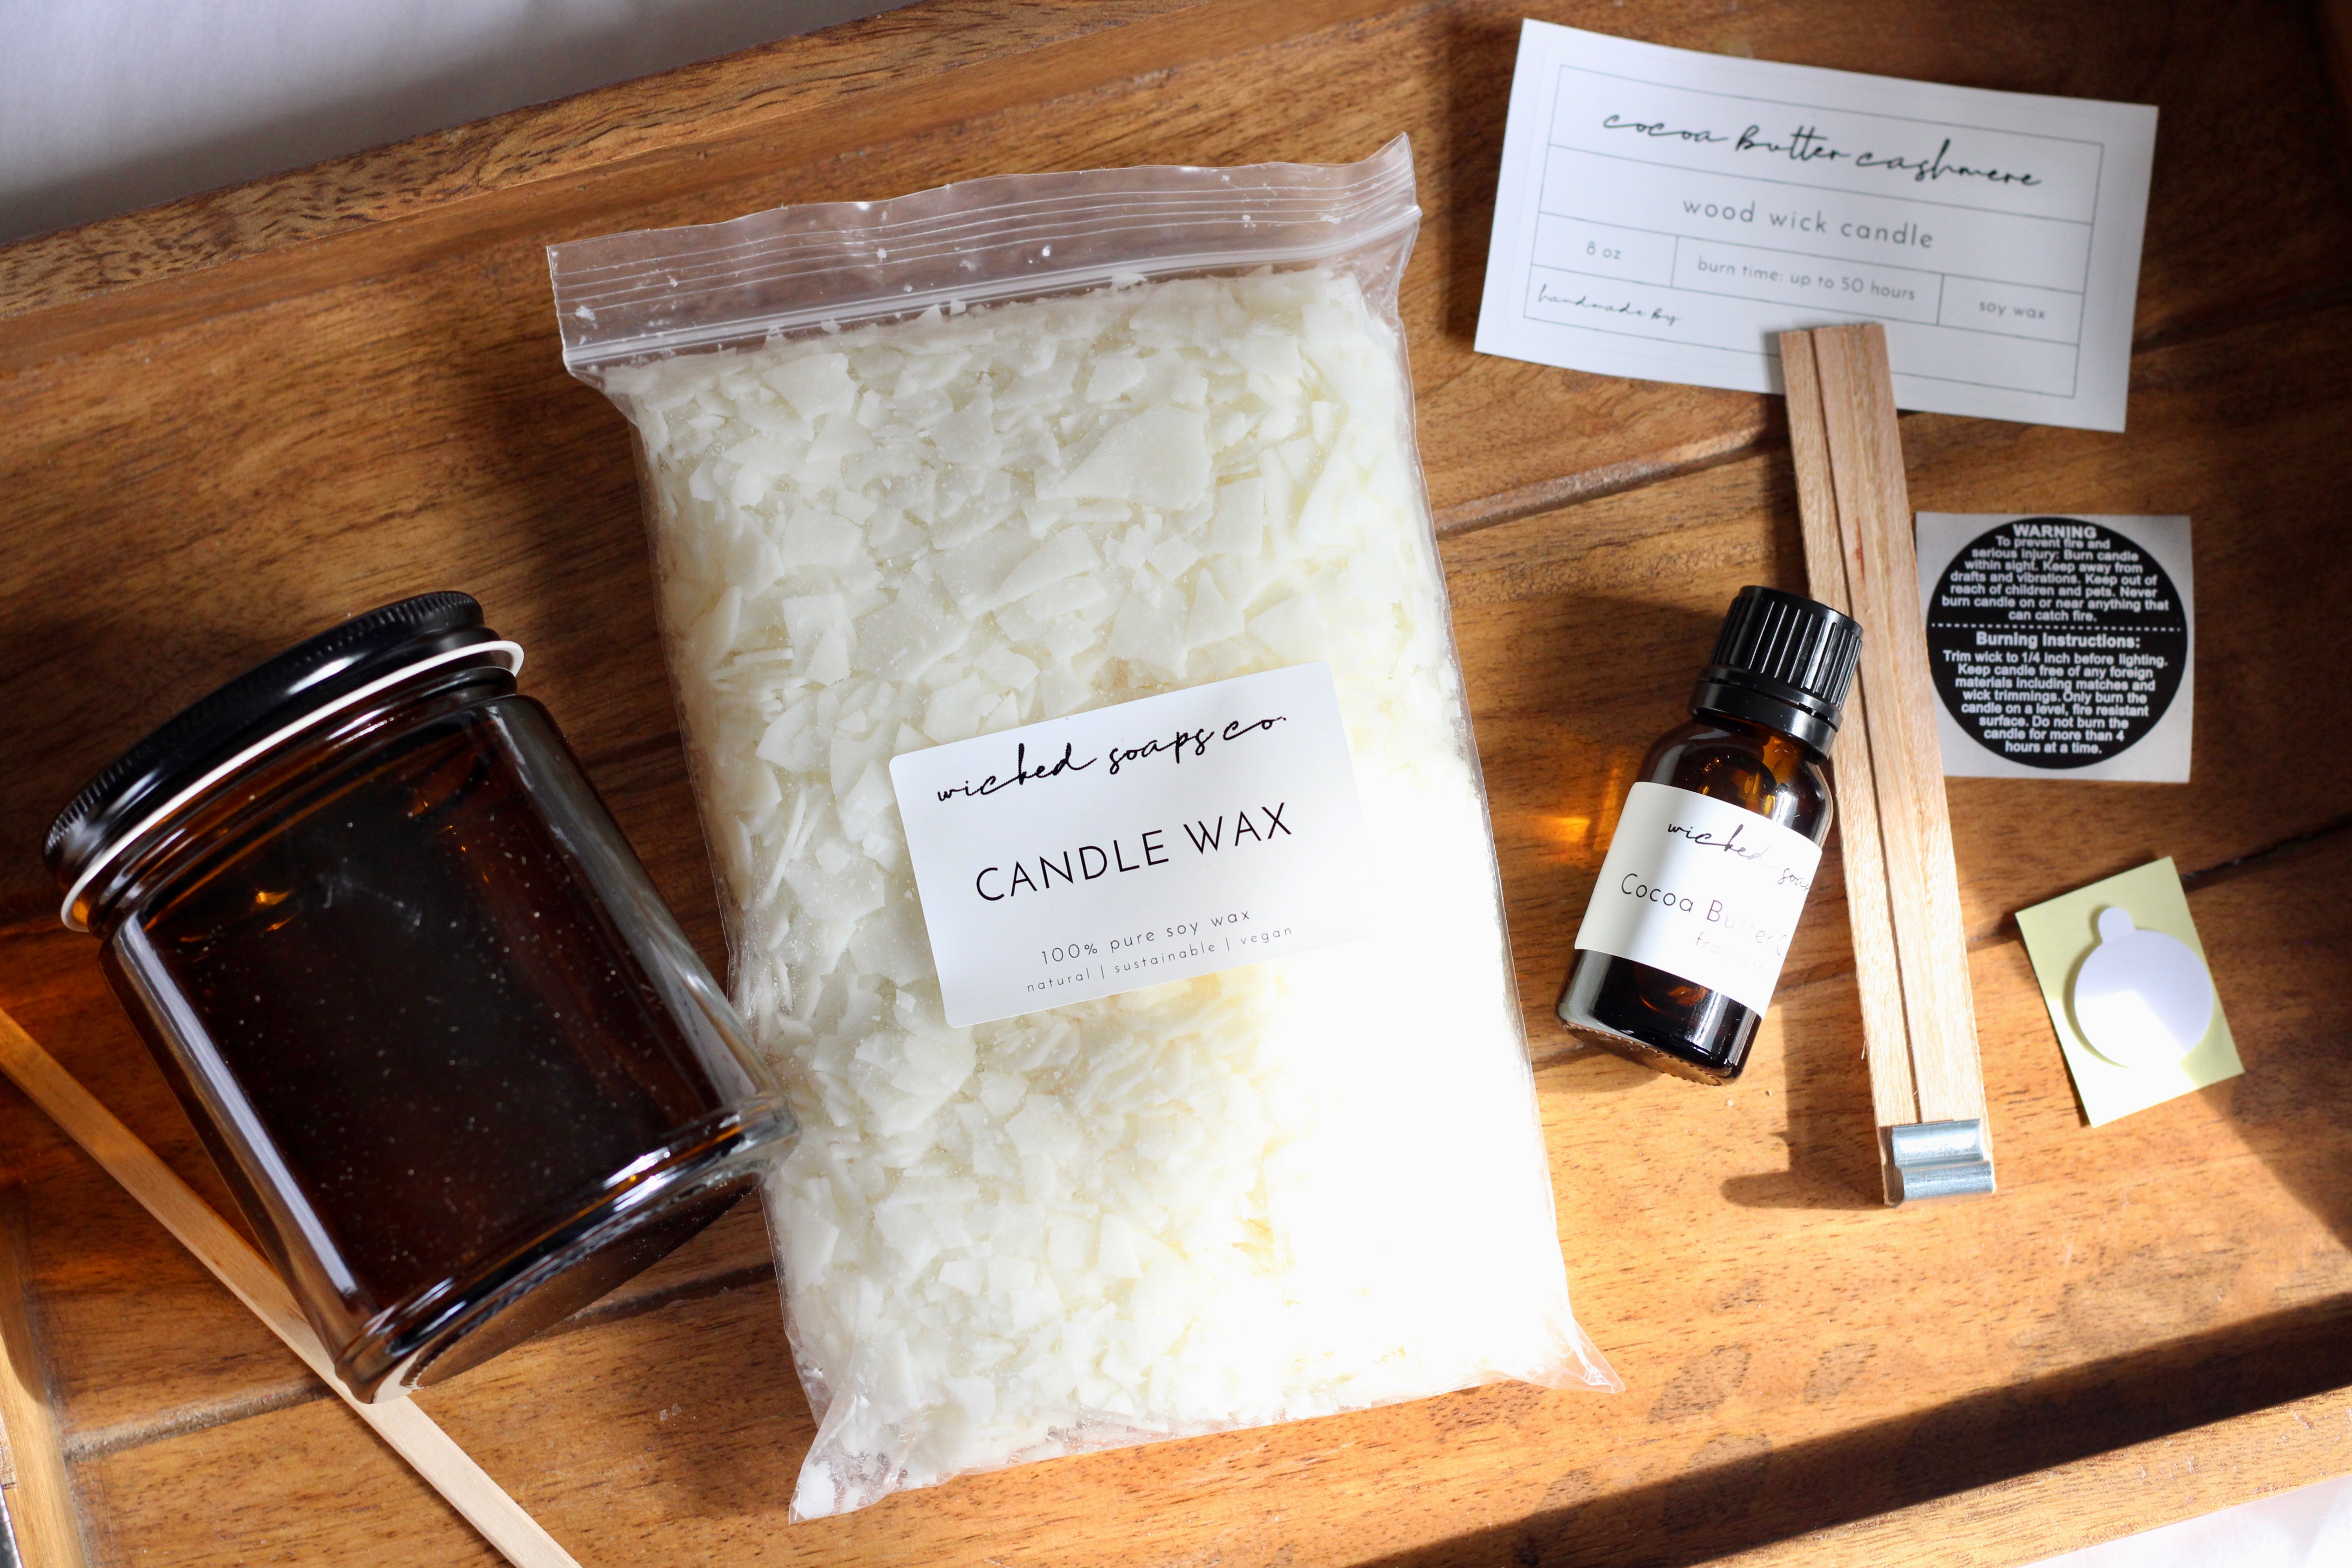 Luxury Soy Wax Candle-Making Kit